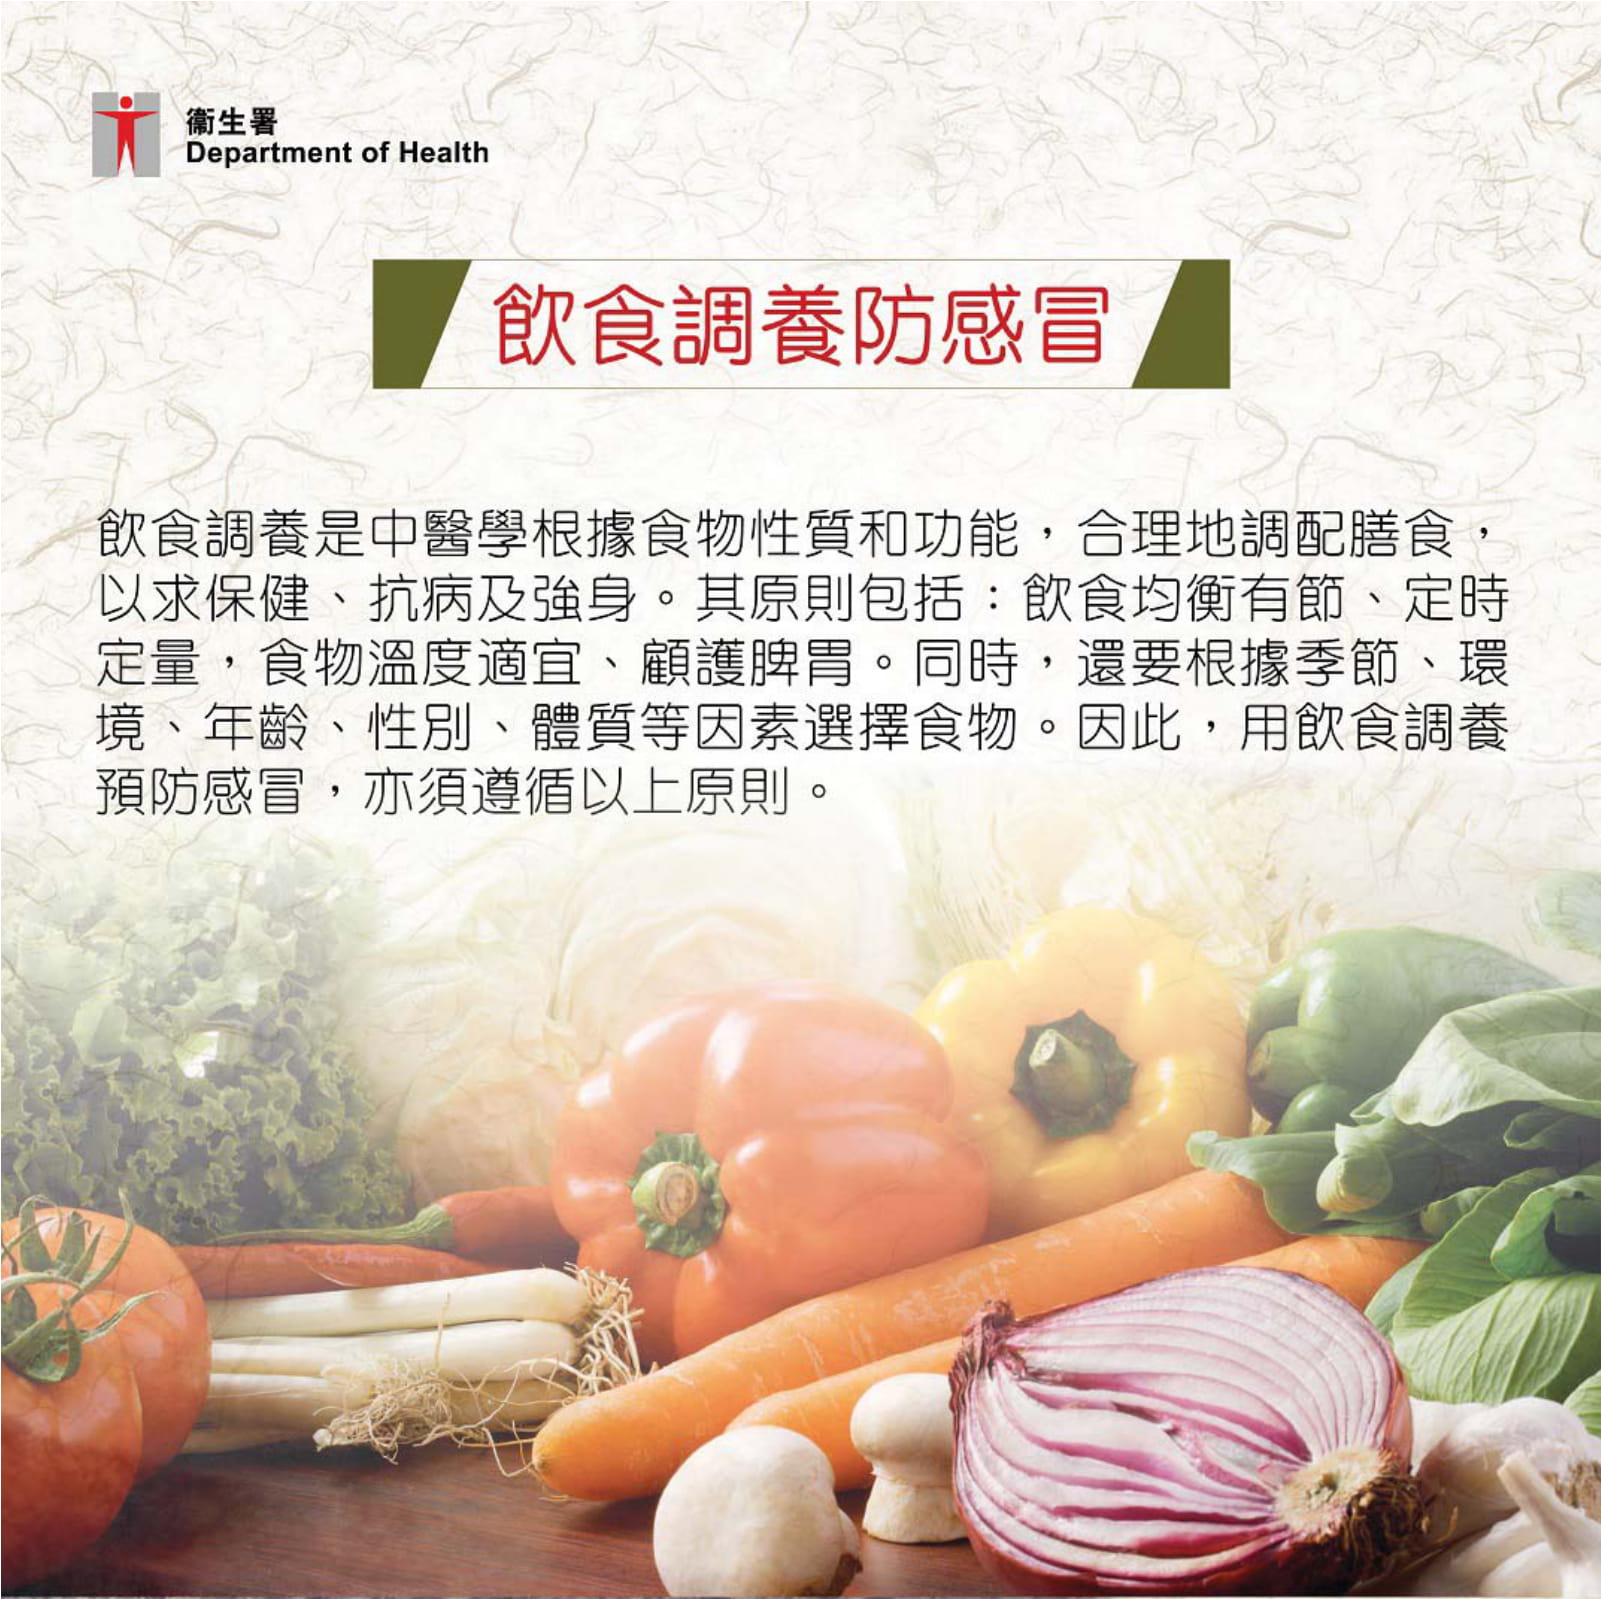 Prevention of Colds by Food (Exhibition Board)(Chinese)